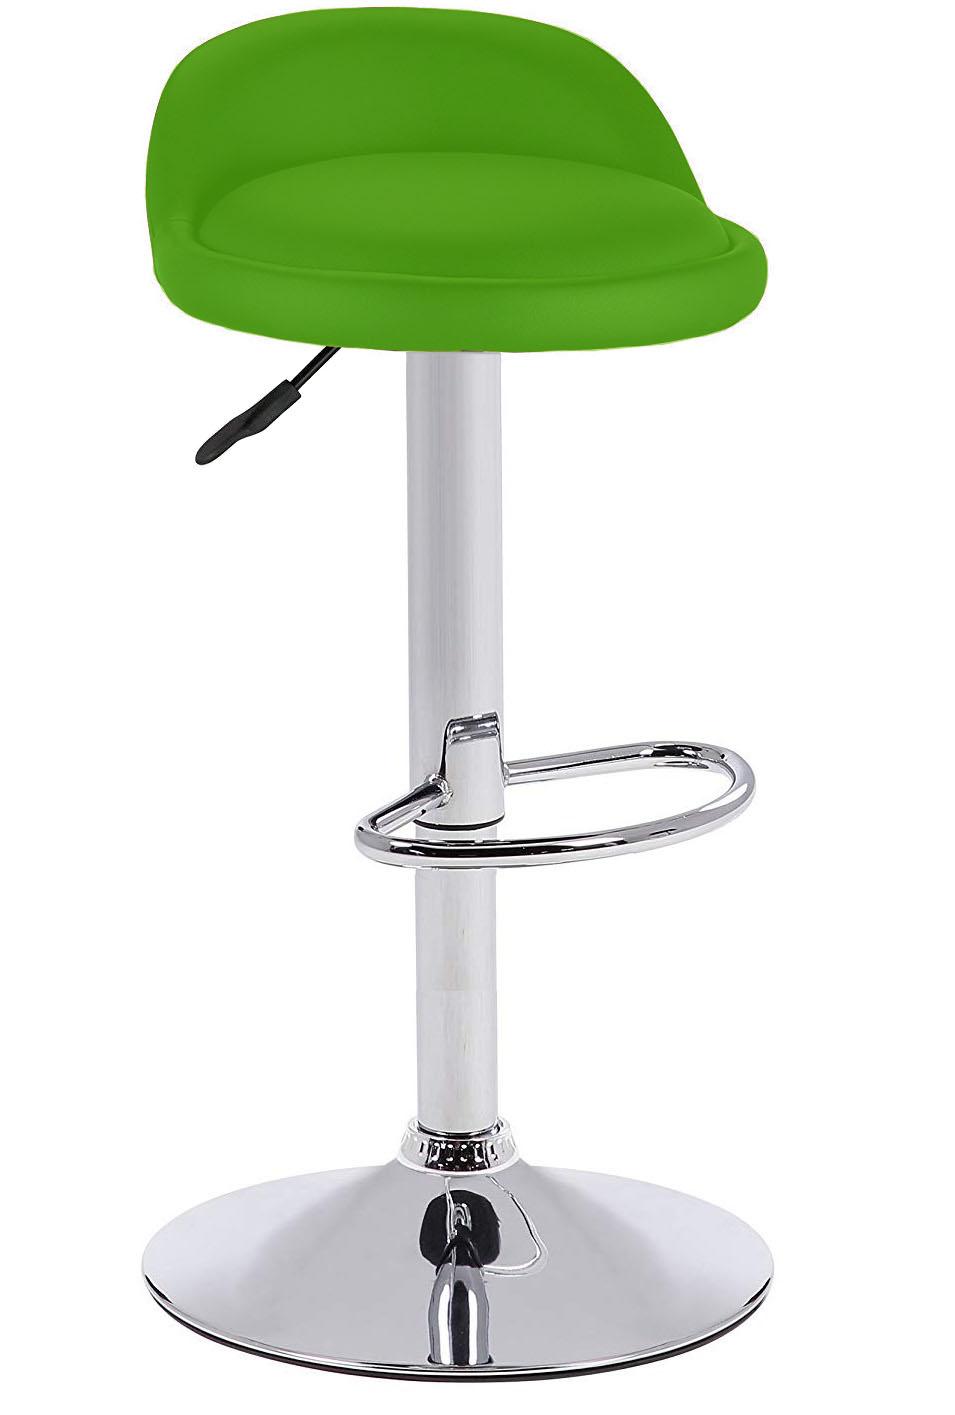 Bar Stool For Sale Bar Stool Chairs Prices Brands Review In